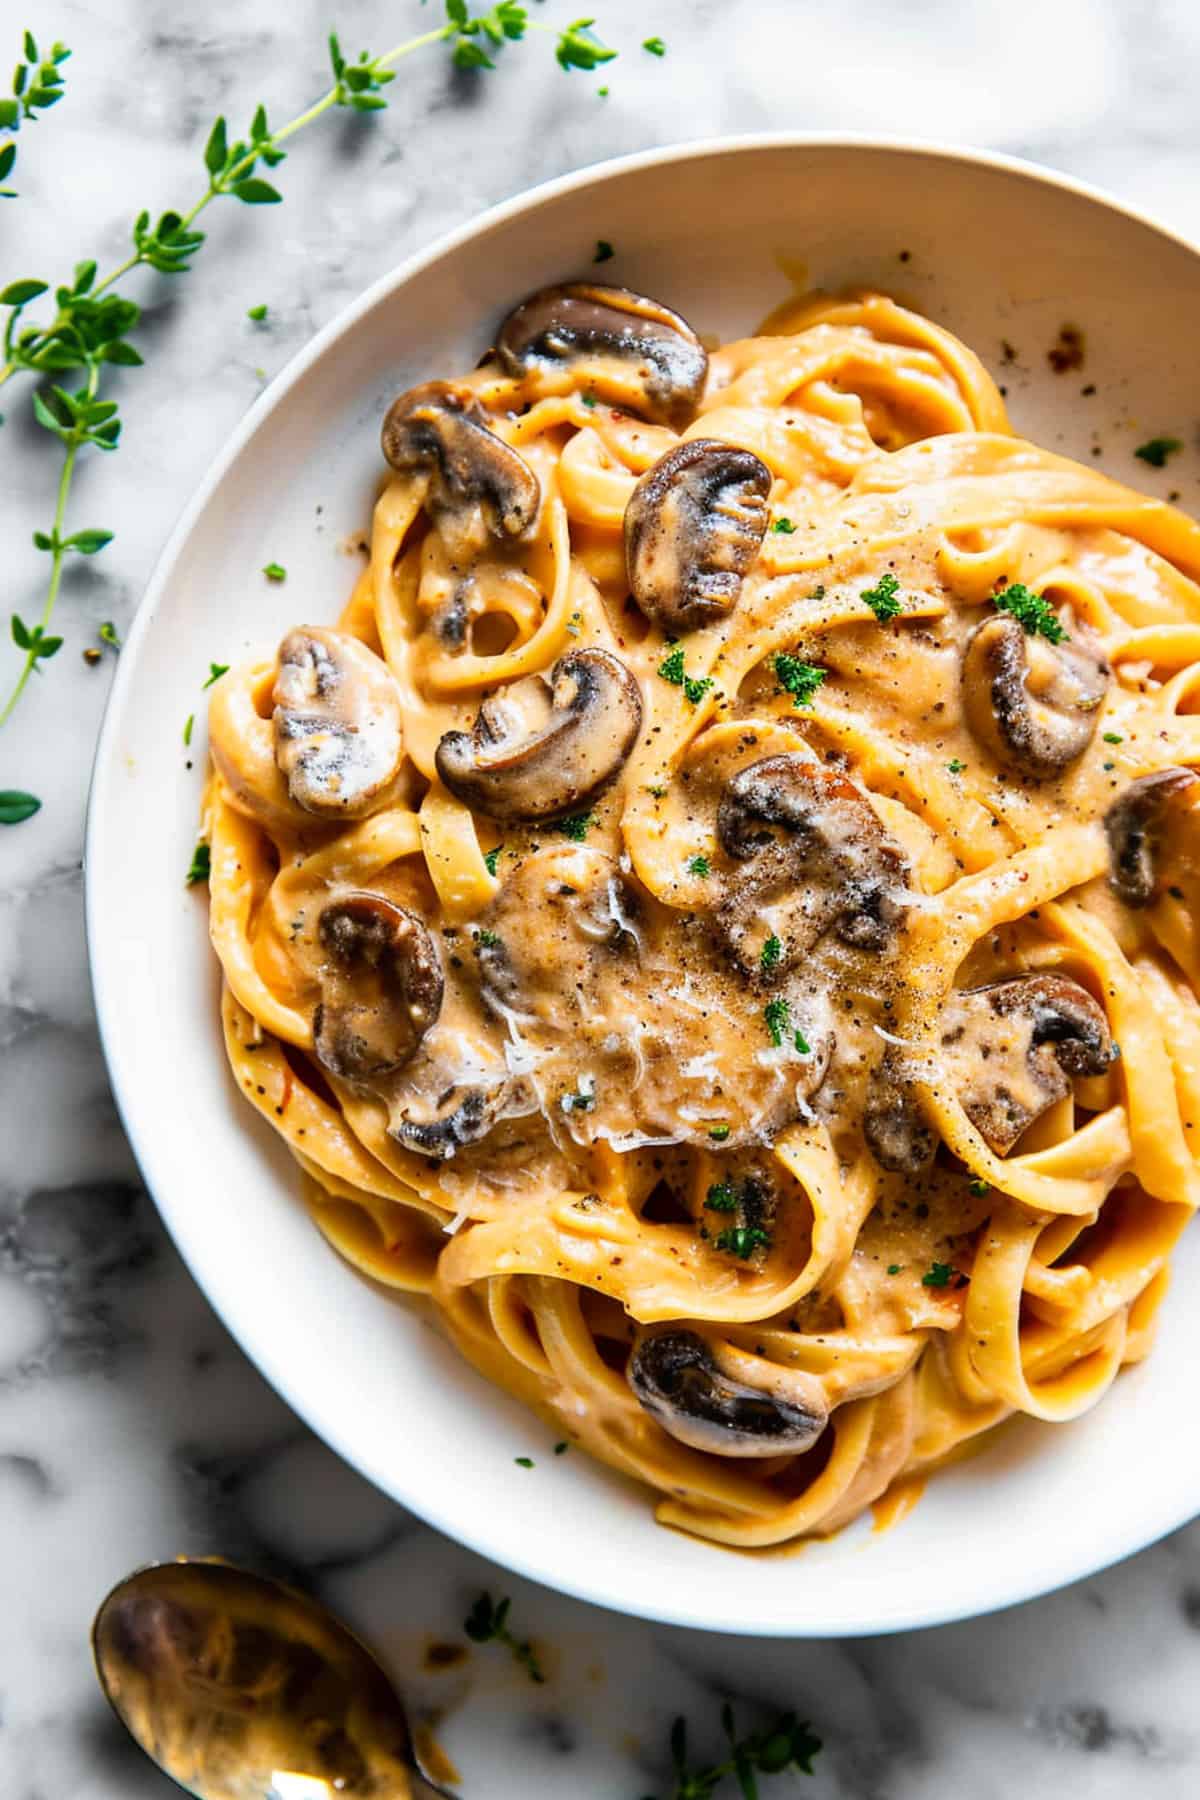 Creamy mushroom and pumpkin fettuccine in a bowl with herbs.